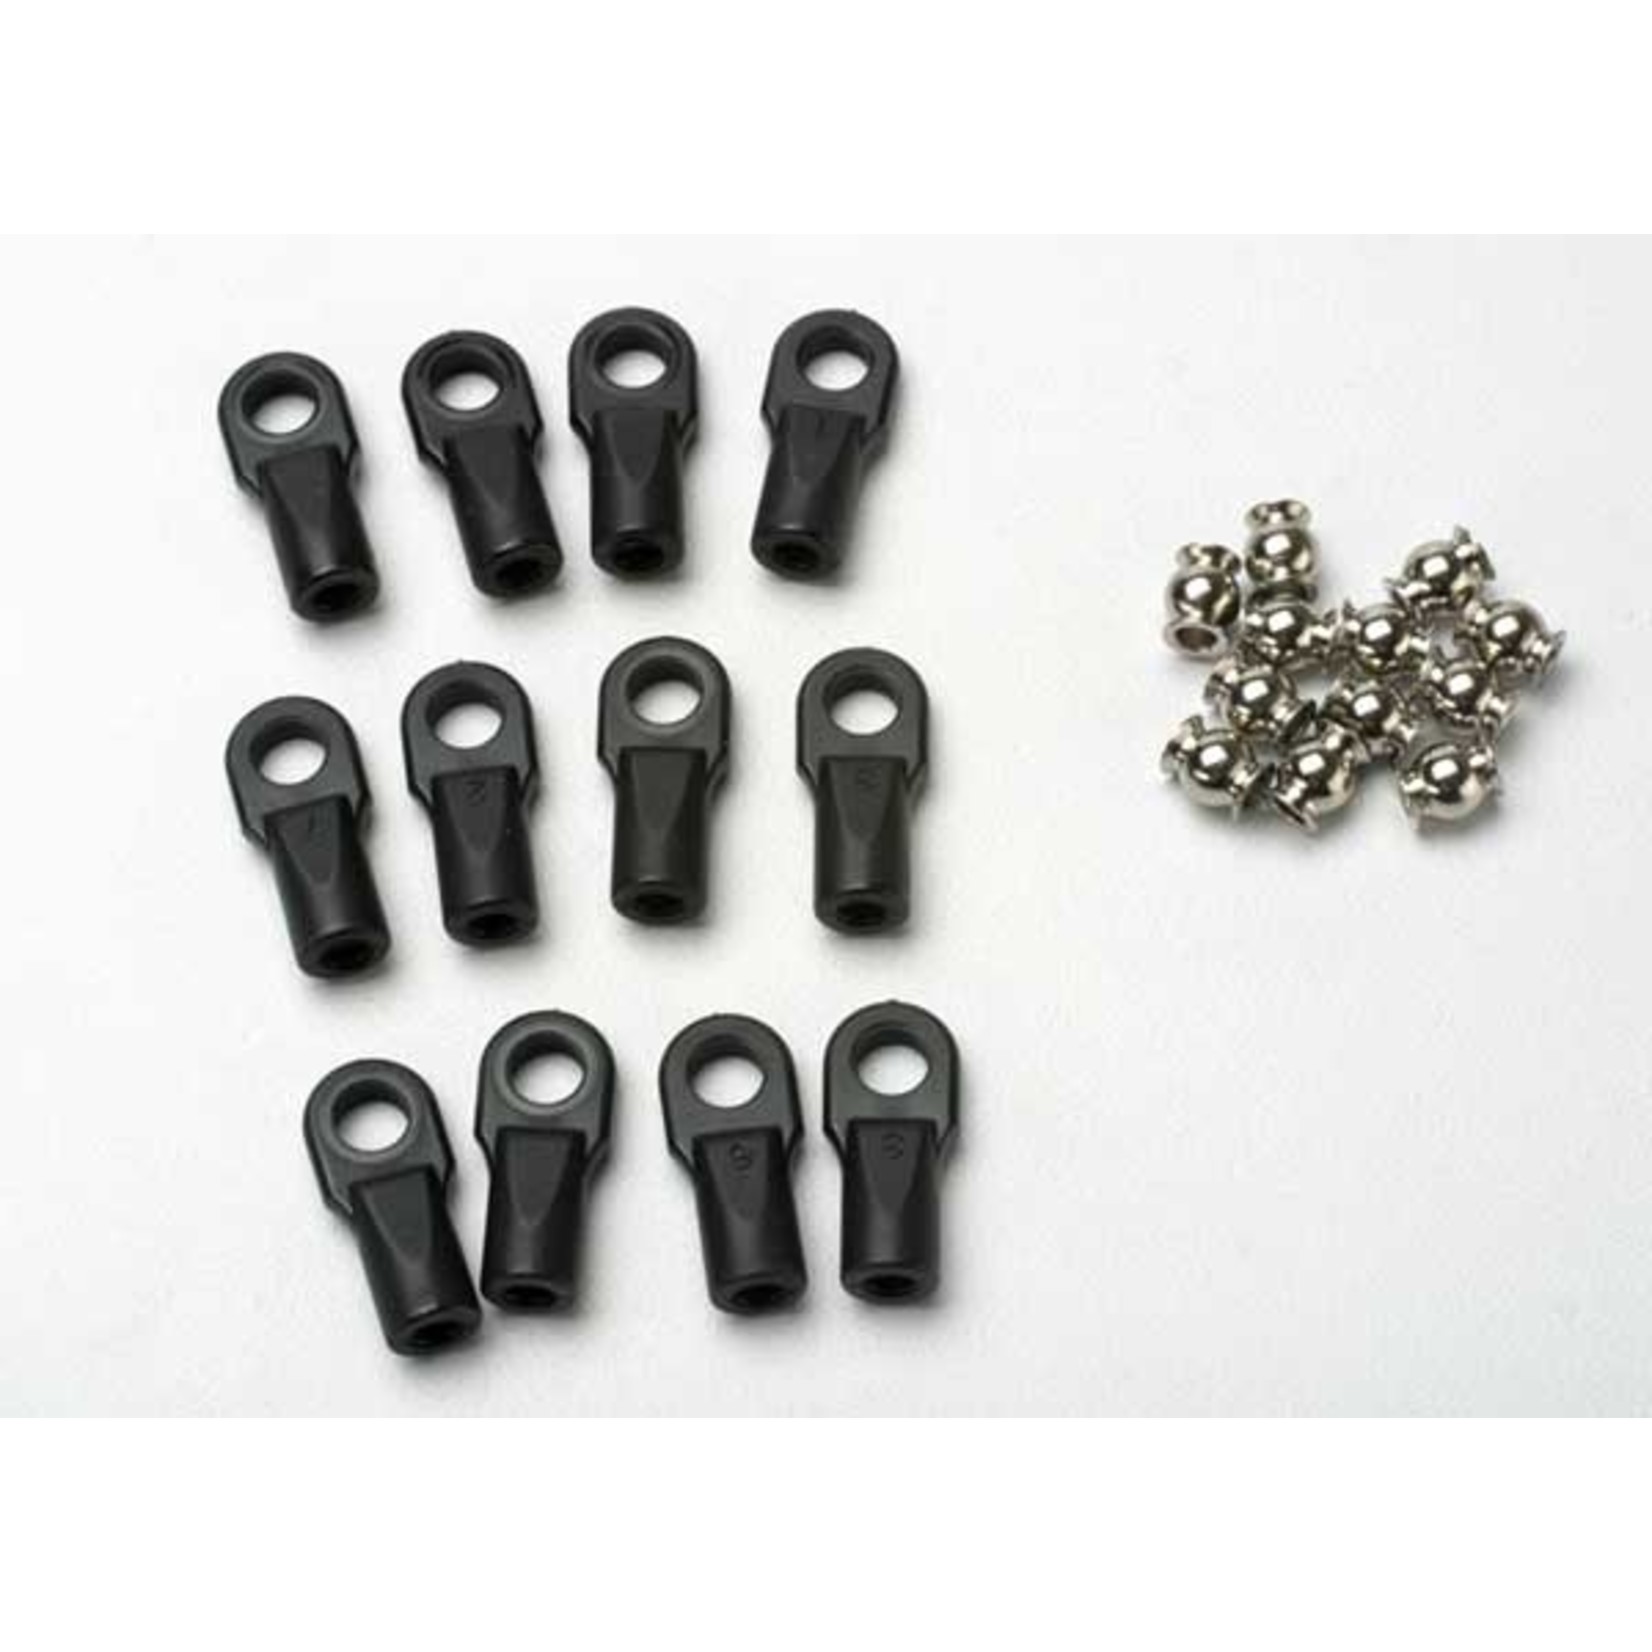 Traxxas 5347 - Rod ends, Revo (large) with hollow balls (1